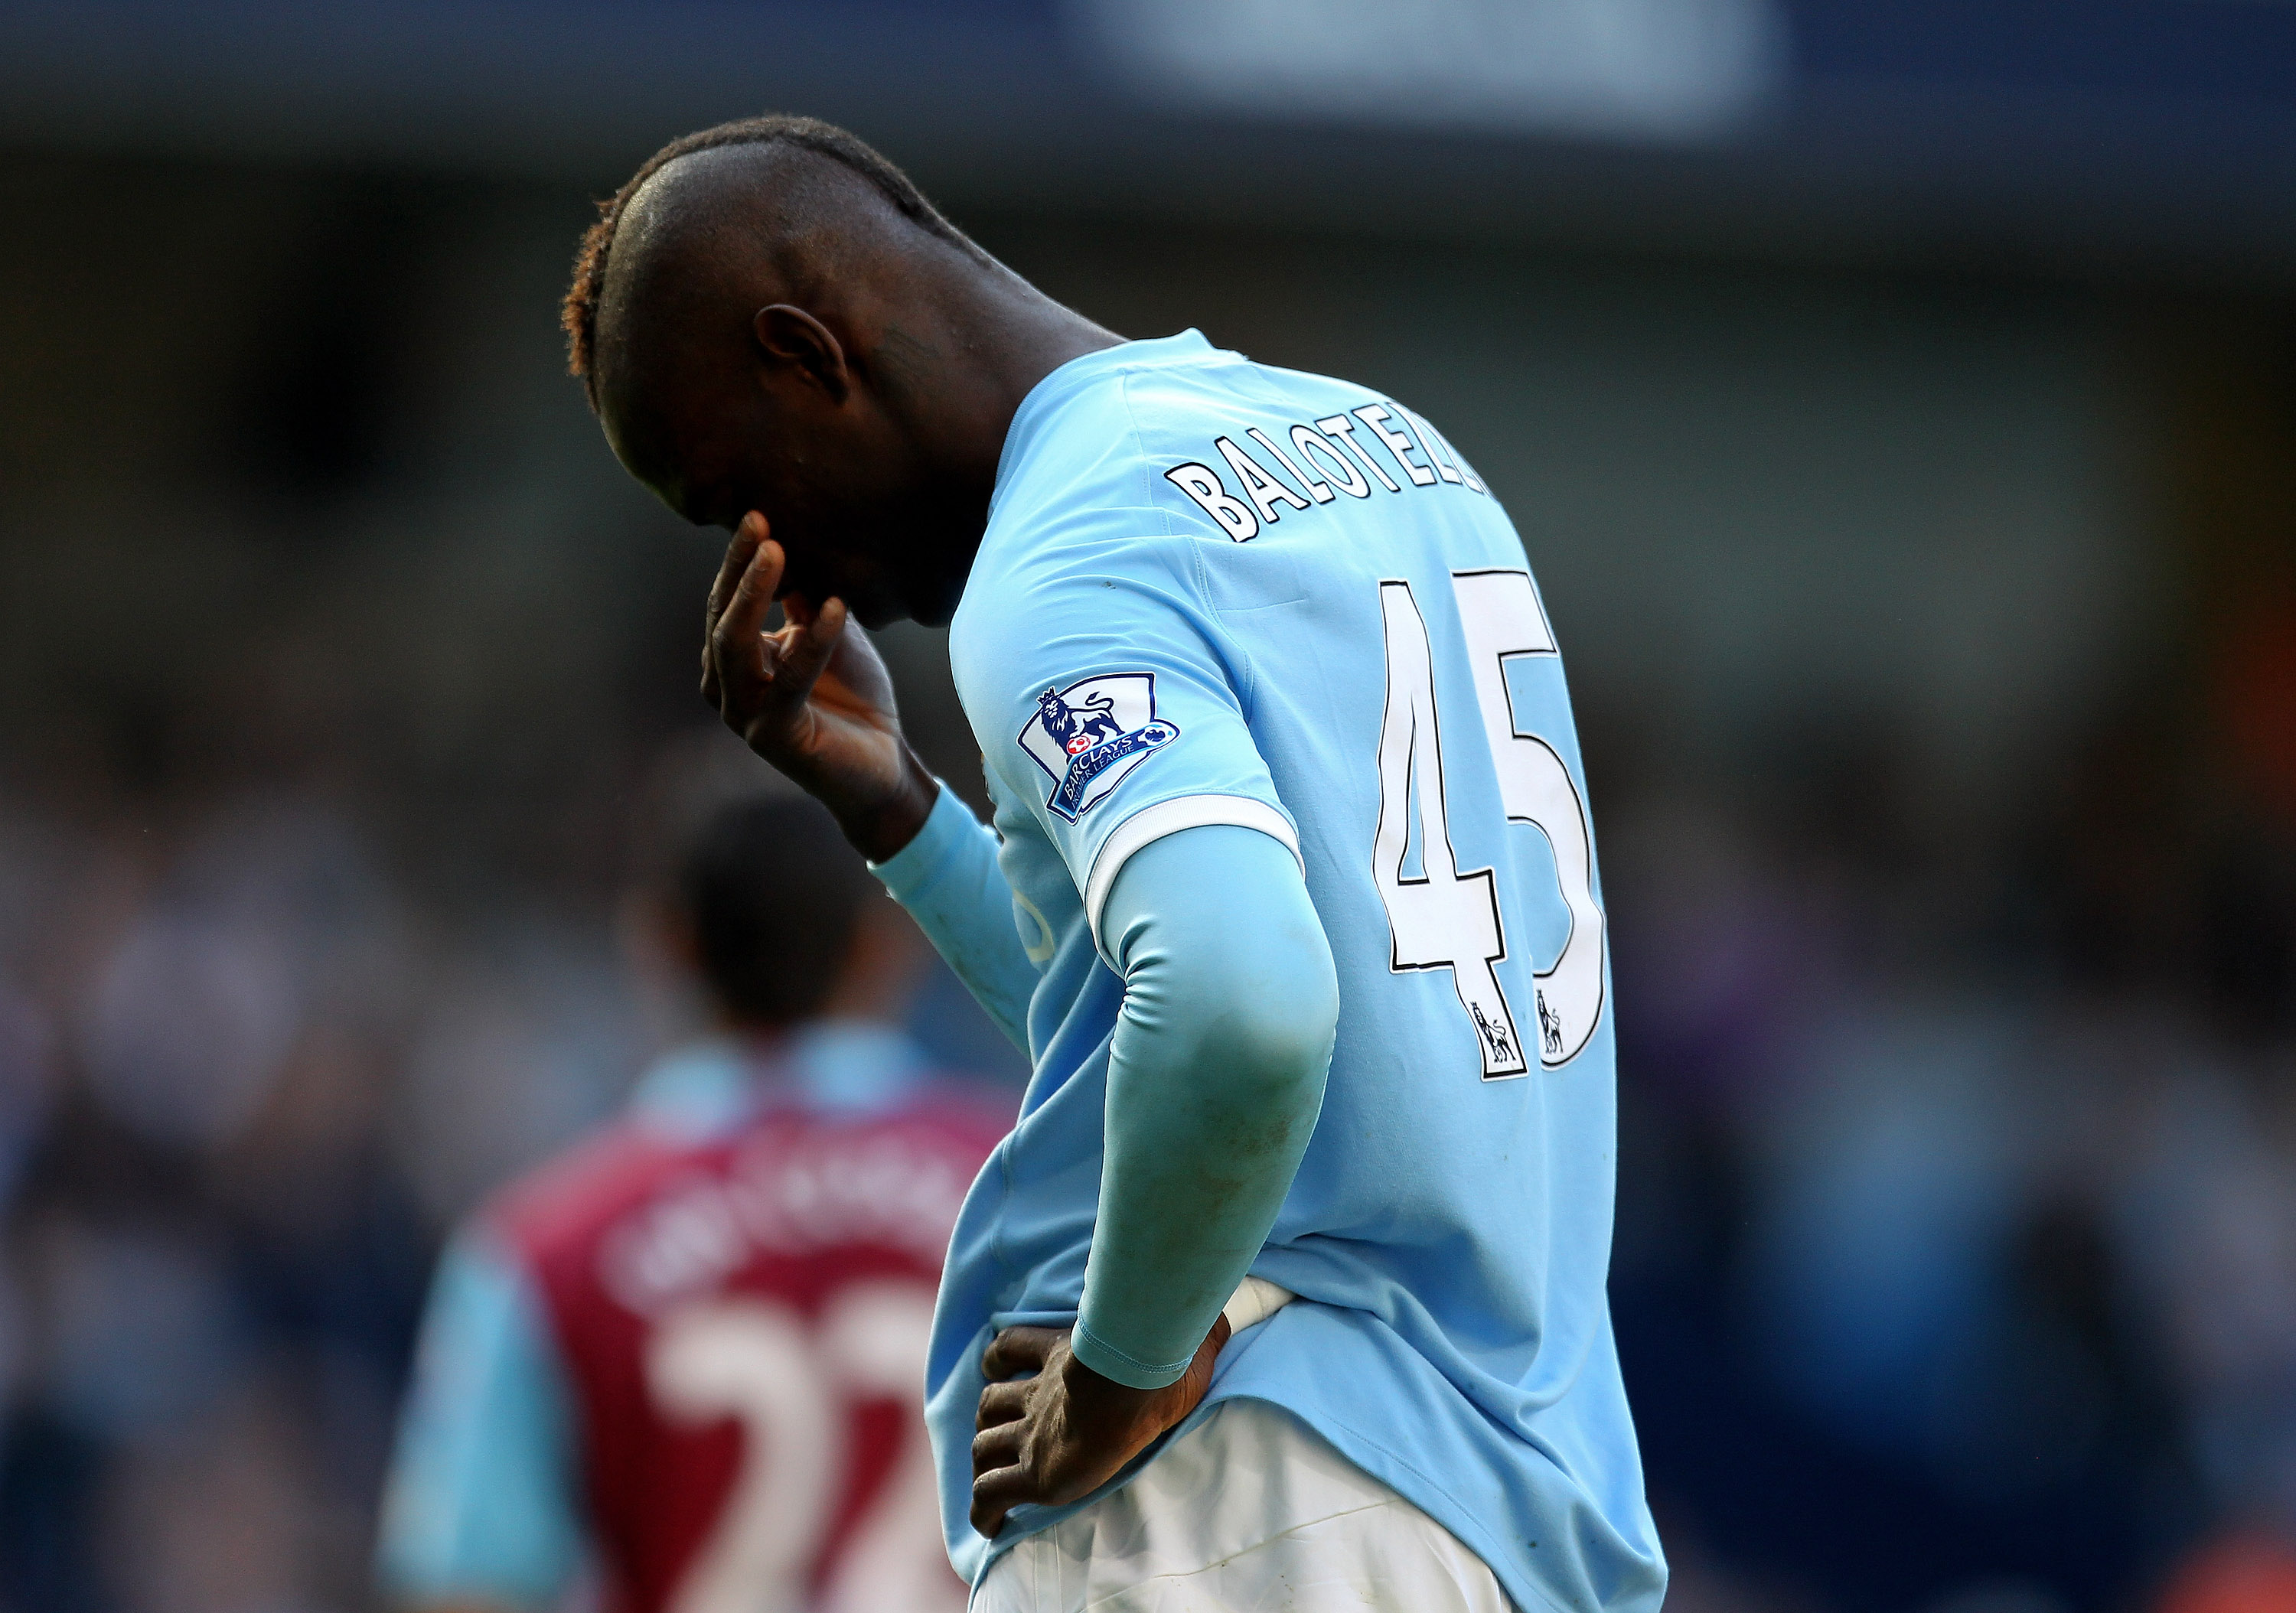 MANCHESTER, ENGLAND - MAY 01:  Mario Balotelli of Manchester City reacts during the Barclays Premier League match between Manchester City and West Ham United at the City of Manchester Stadium on May 1, 2011 in Manchester, England.  (Photo by Alex Livesey/